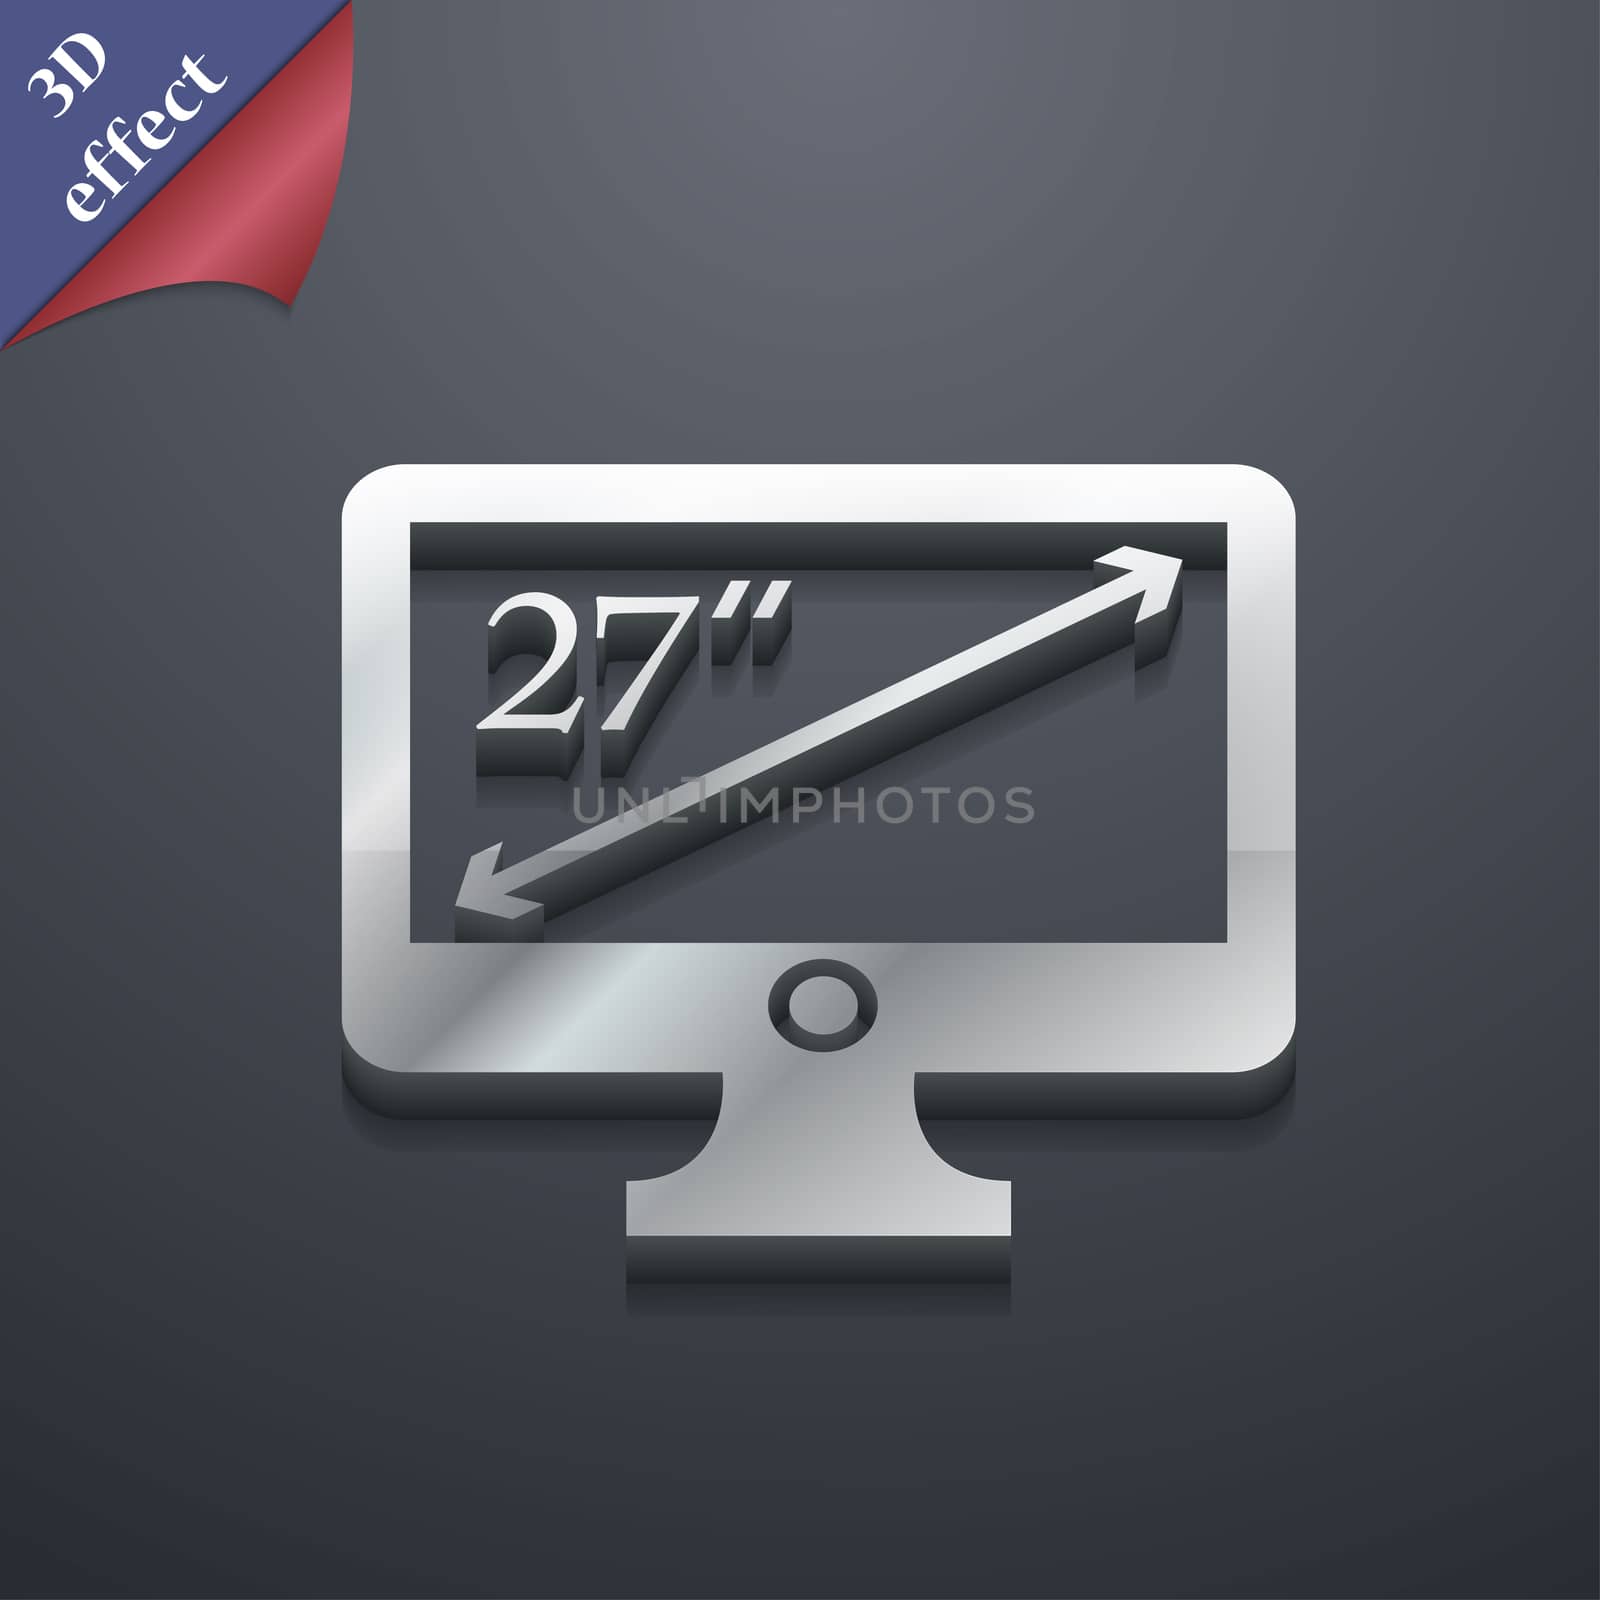 diagonal of the monitor 27 inches icon symbol. 3D style. Trendy, modern design with space for your text illustration. Rastrized copy